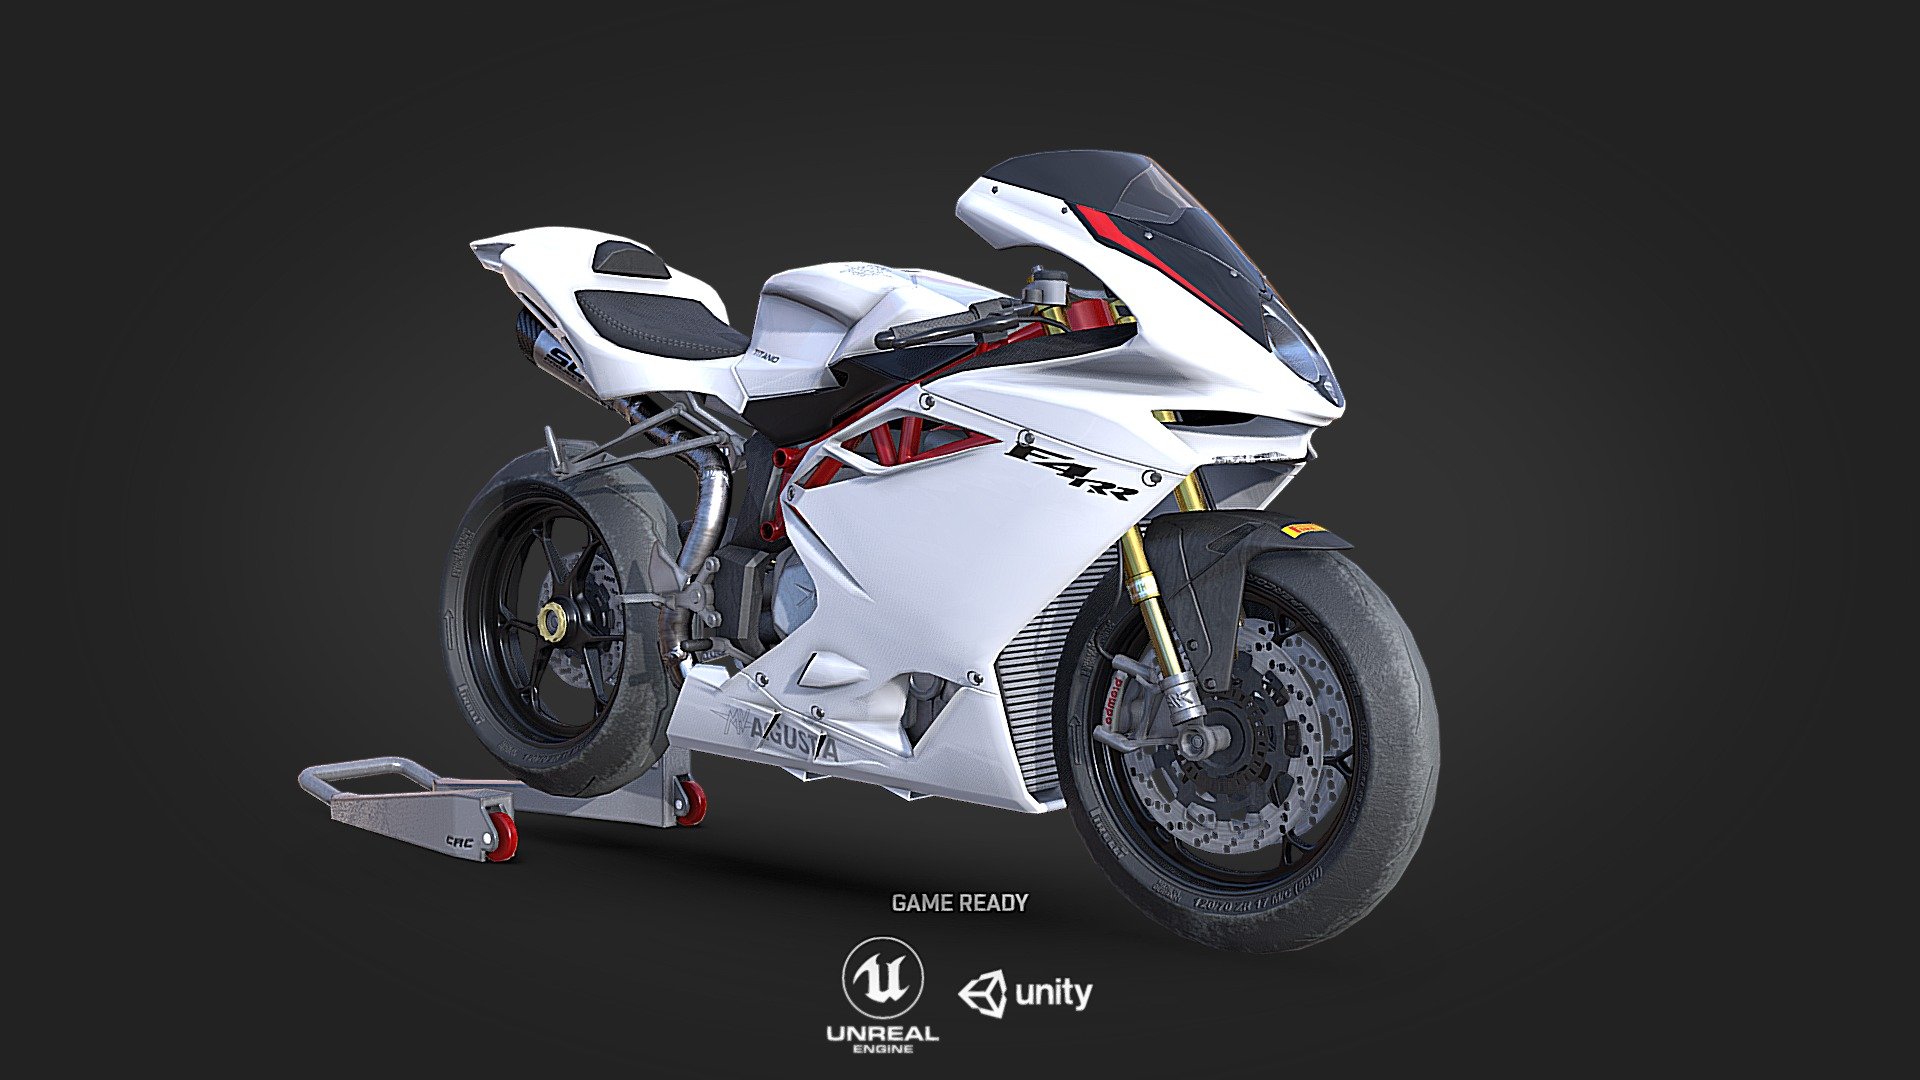 High Quality Game Ready Model





Can be used in Unreal Engine, Unity or another game engine. Ideal for racing games.




Mid Poly Model ideal for games




Features a basic engine and working part details




1 Texture set across the board which is ideal in keeping draw calls low




Suitable for desktop games, mobile games and CG applications



Included Files

Base Colour, Metallic, Roughness, Normal, Ambient Occlusion and Opacity maps - 2016 MV Agusta F4RR - Buy Royalty Free 3D model by SoFlyyDinero (@Stagea260RS) 3d model